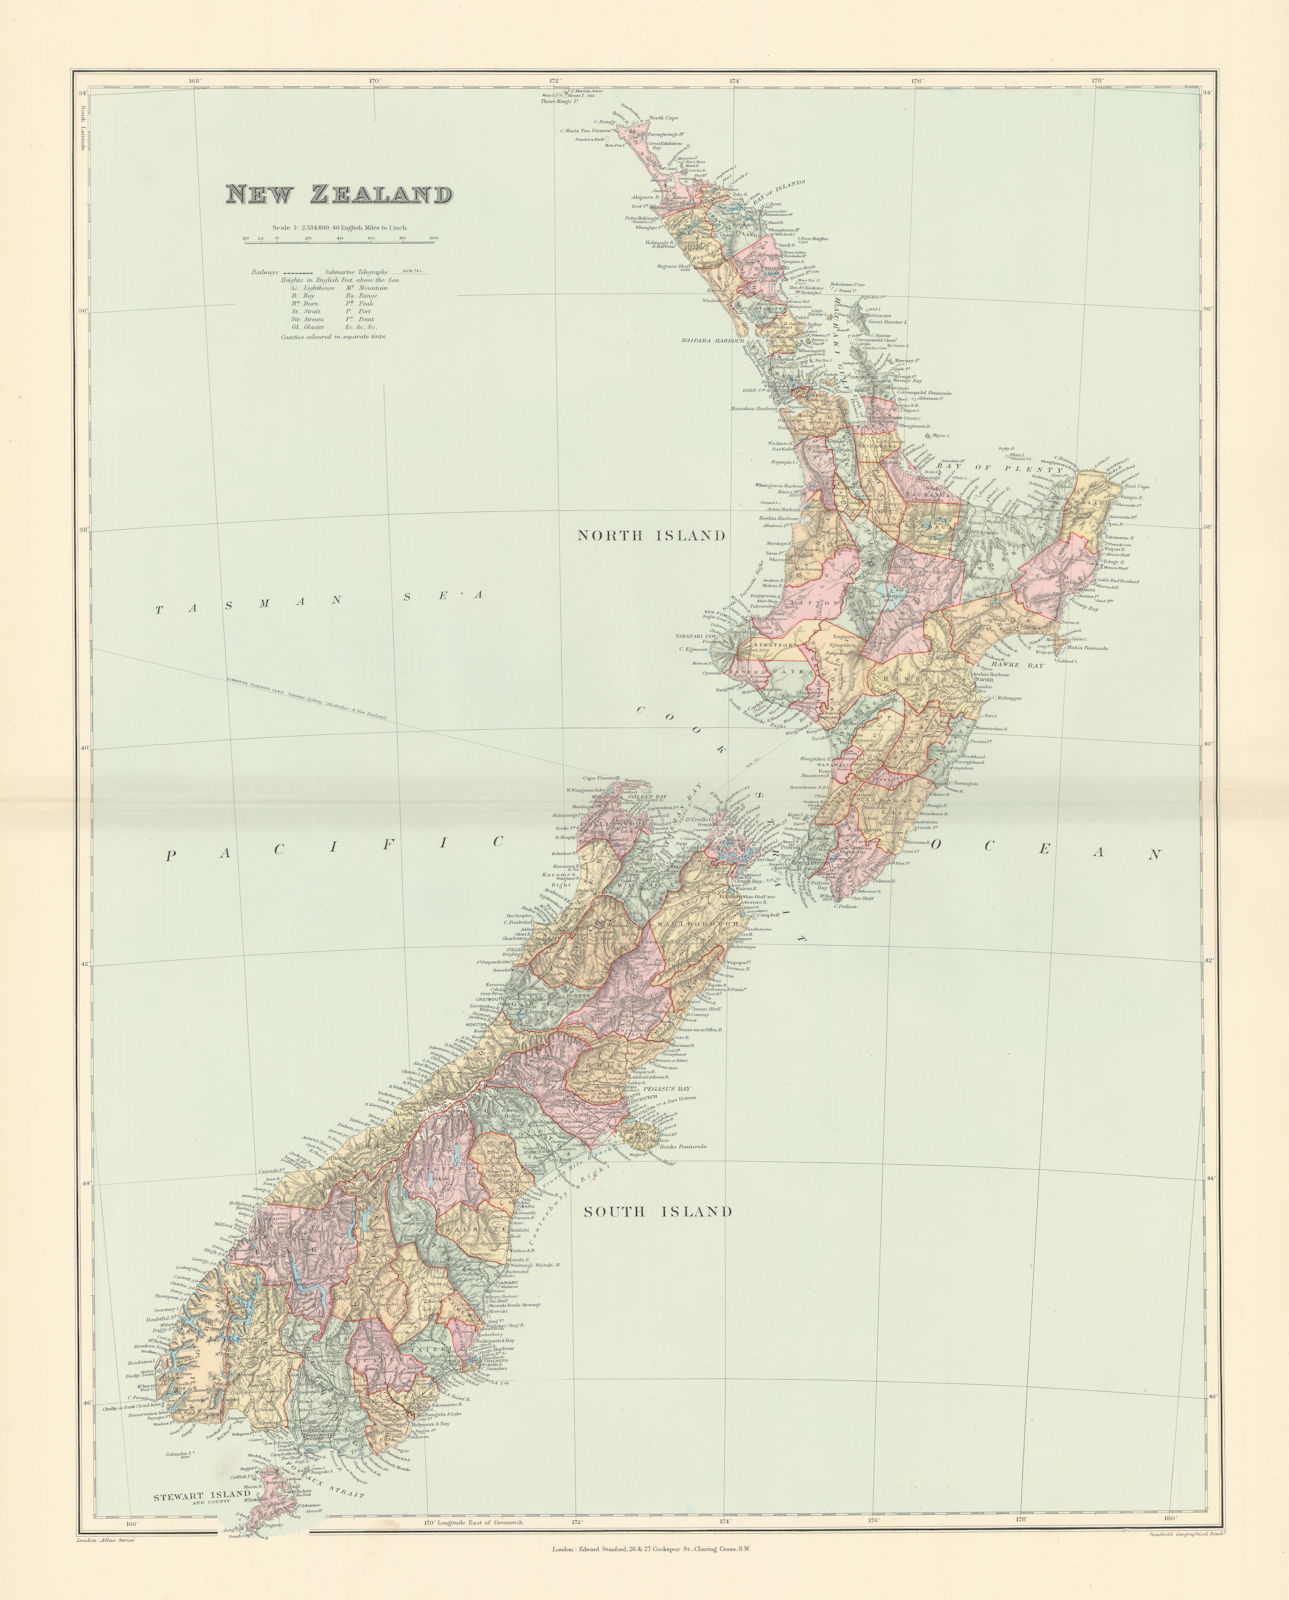 New Zealand. Counties. Railways. Large 64x50cm. STANFORD 1896 old antique map